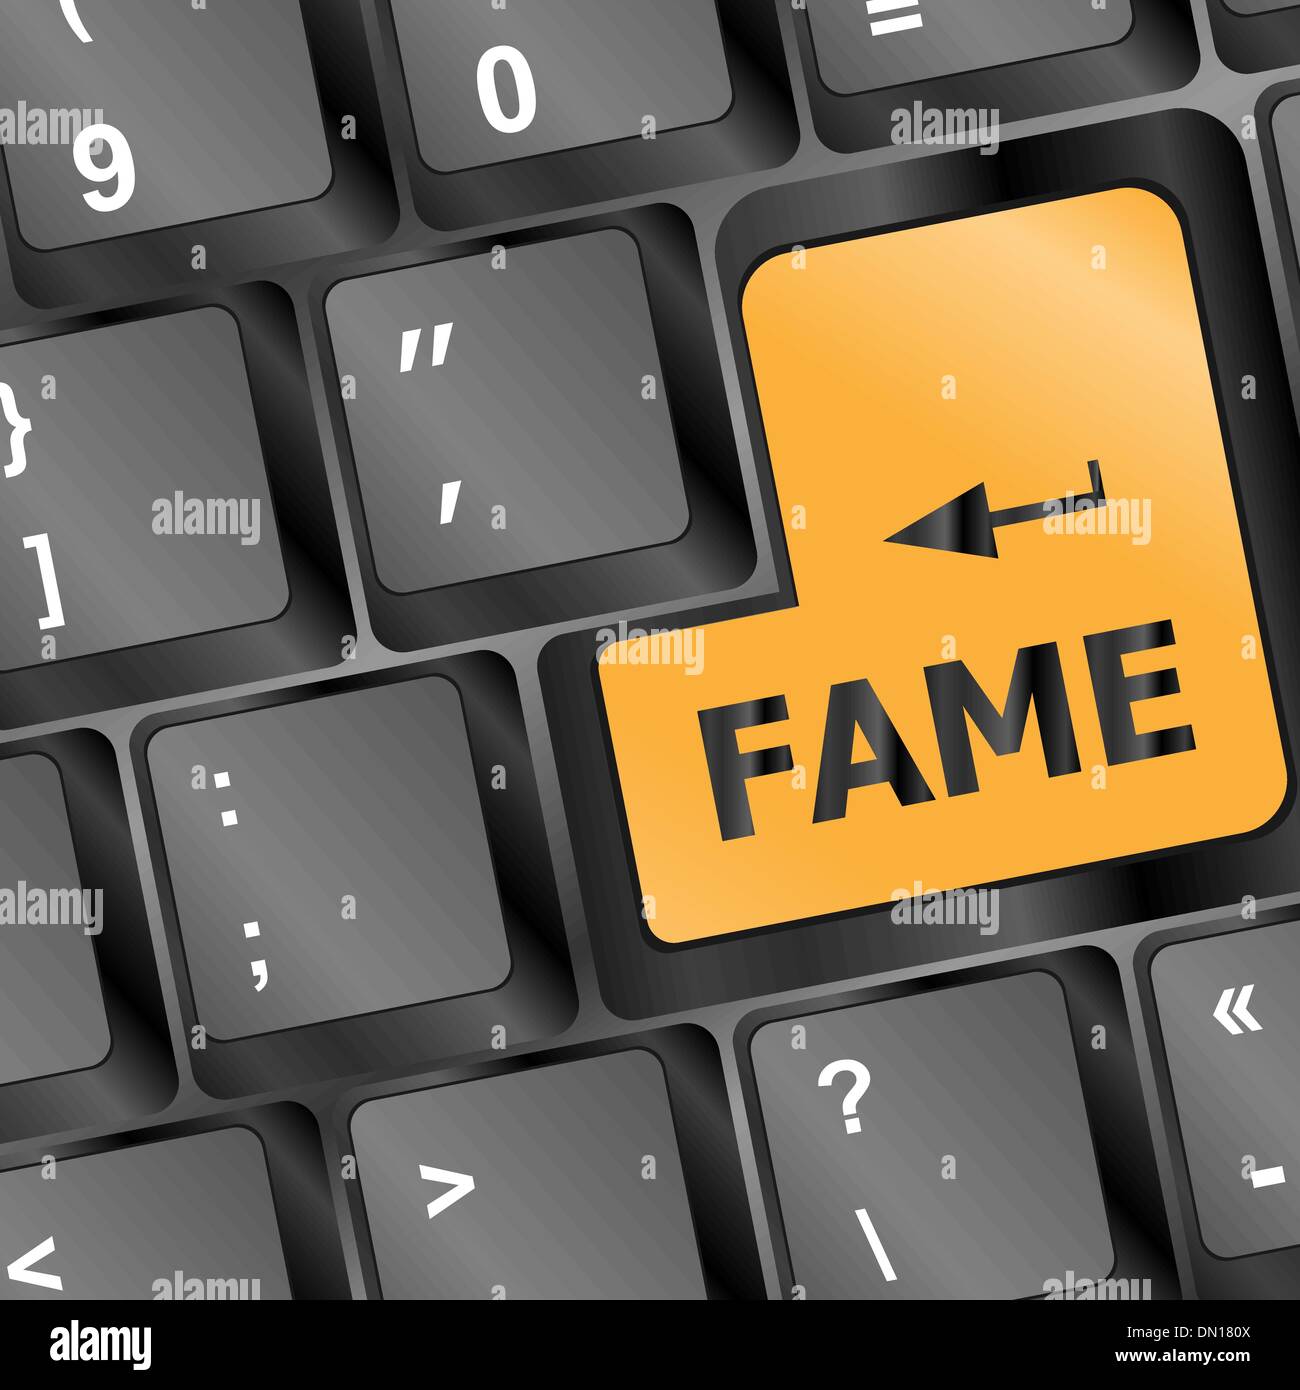 Computer Keyboard with Fame Key Stock Vector